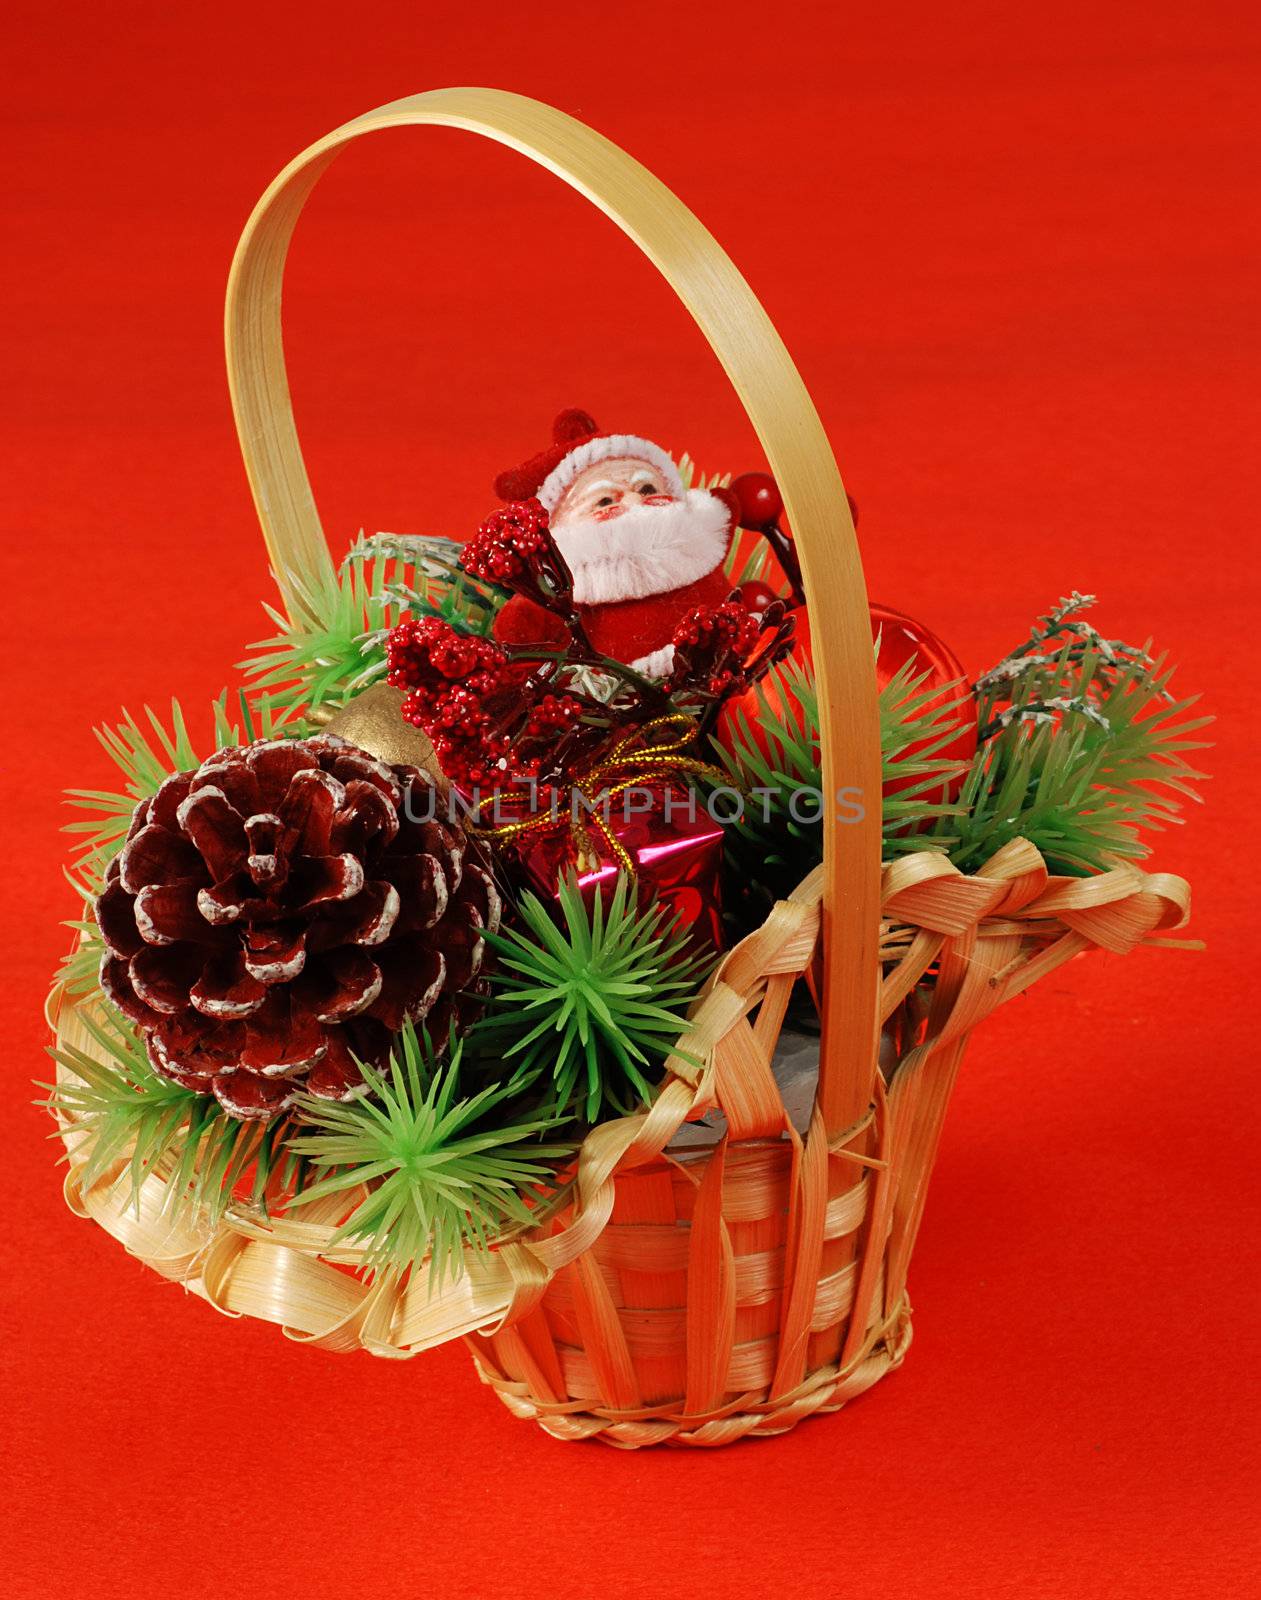 Basket with traditional christmas decorations - Santa and pine cone